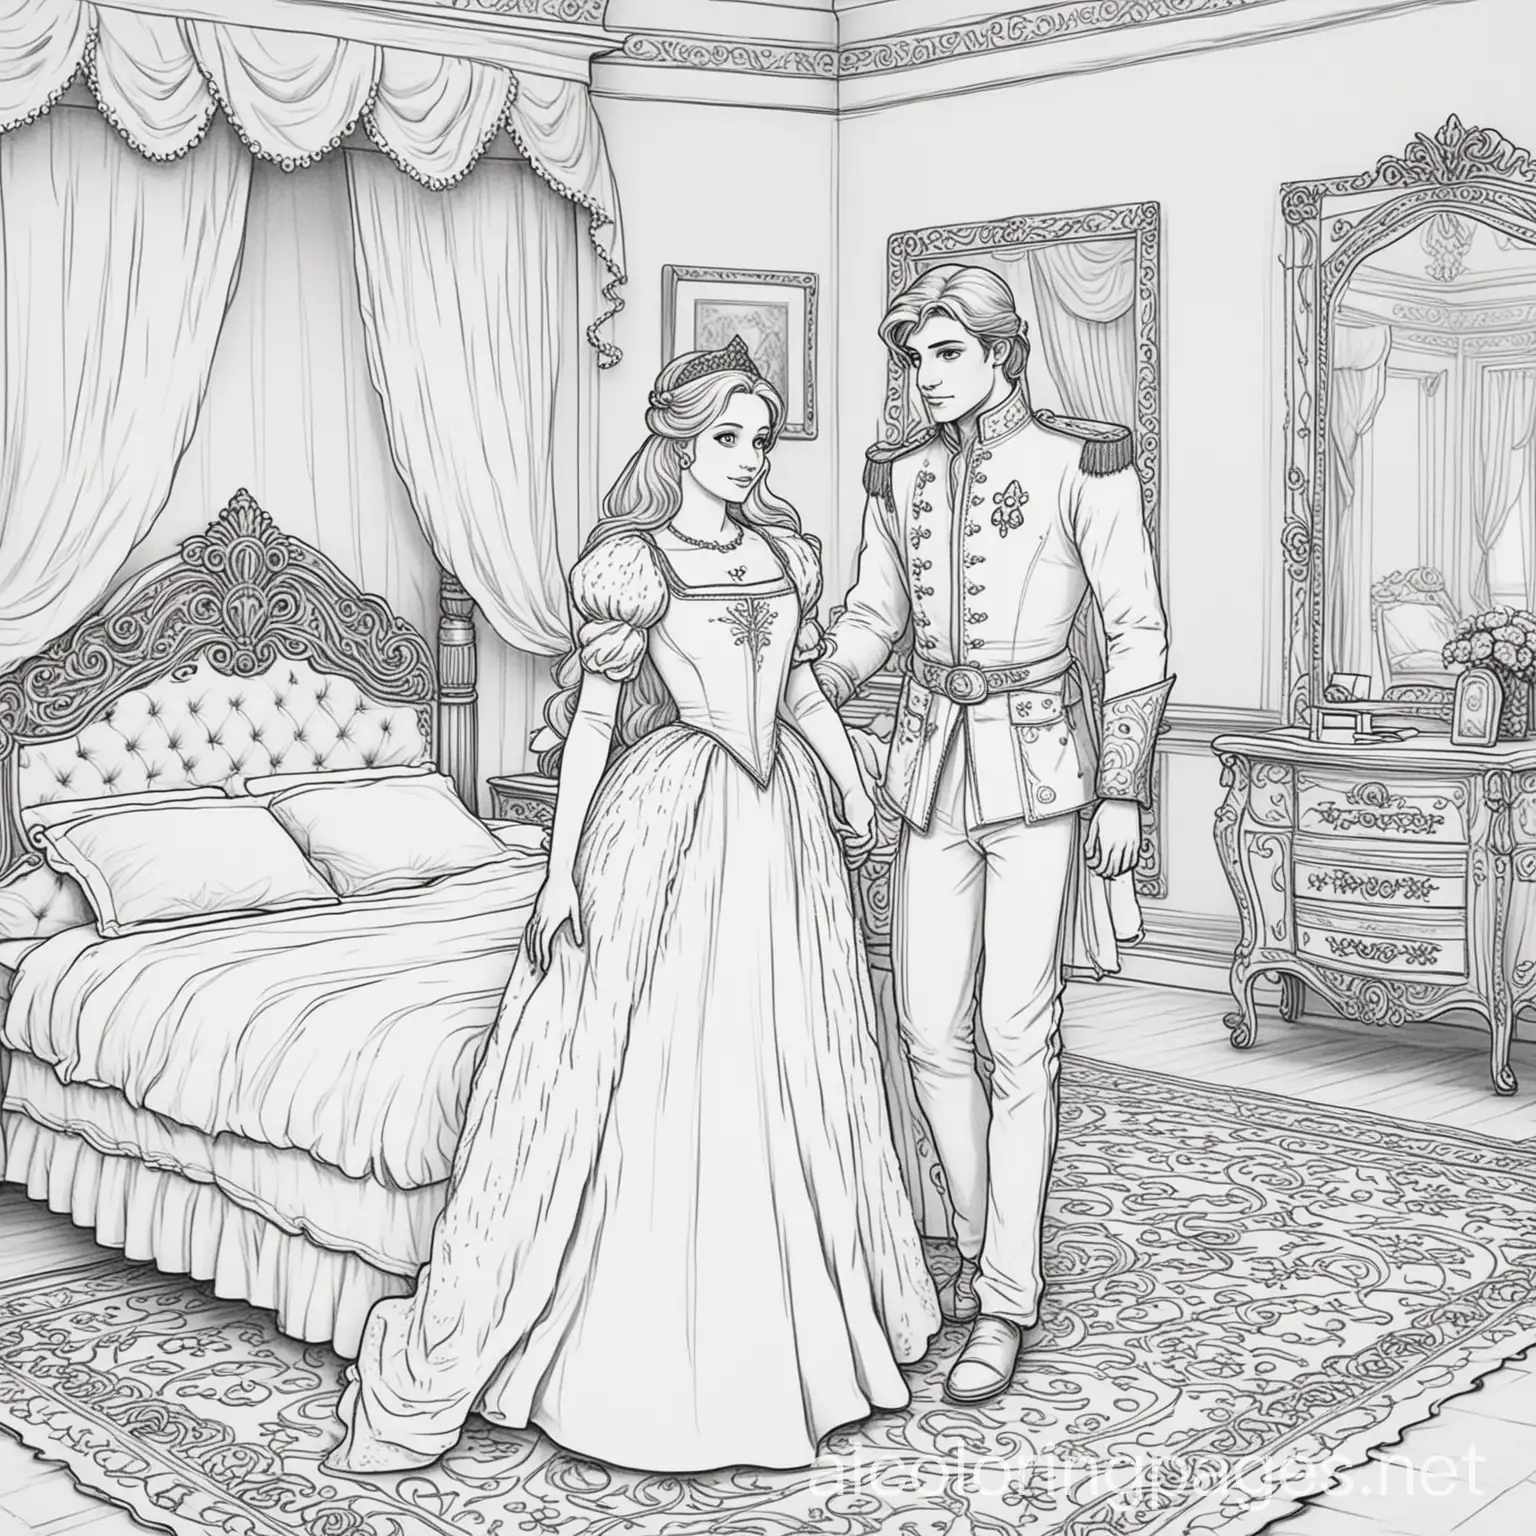 young prince standing across a princess in the princess's bed room, Coloring Page, black and white, line art, white background, Simplicity, Ample White Space. The background of the coloring page is plain white to make it easy for young children to color within the lines. The outlines of all the subjects are easy to distinguish, making it simple for kids to color without too much difficulty